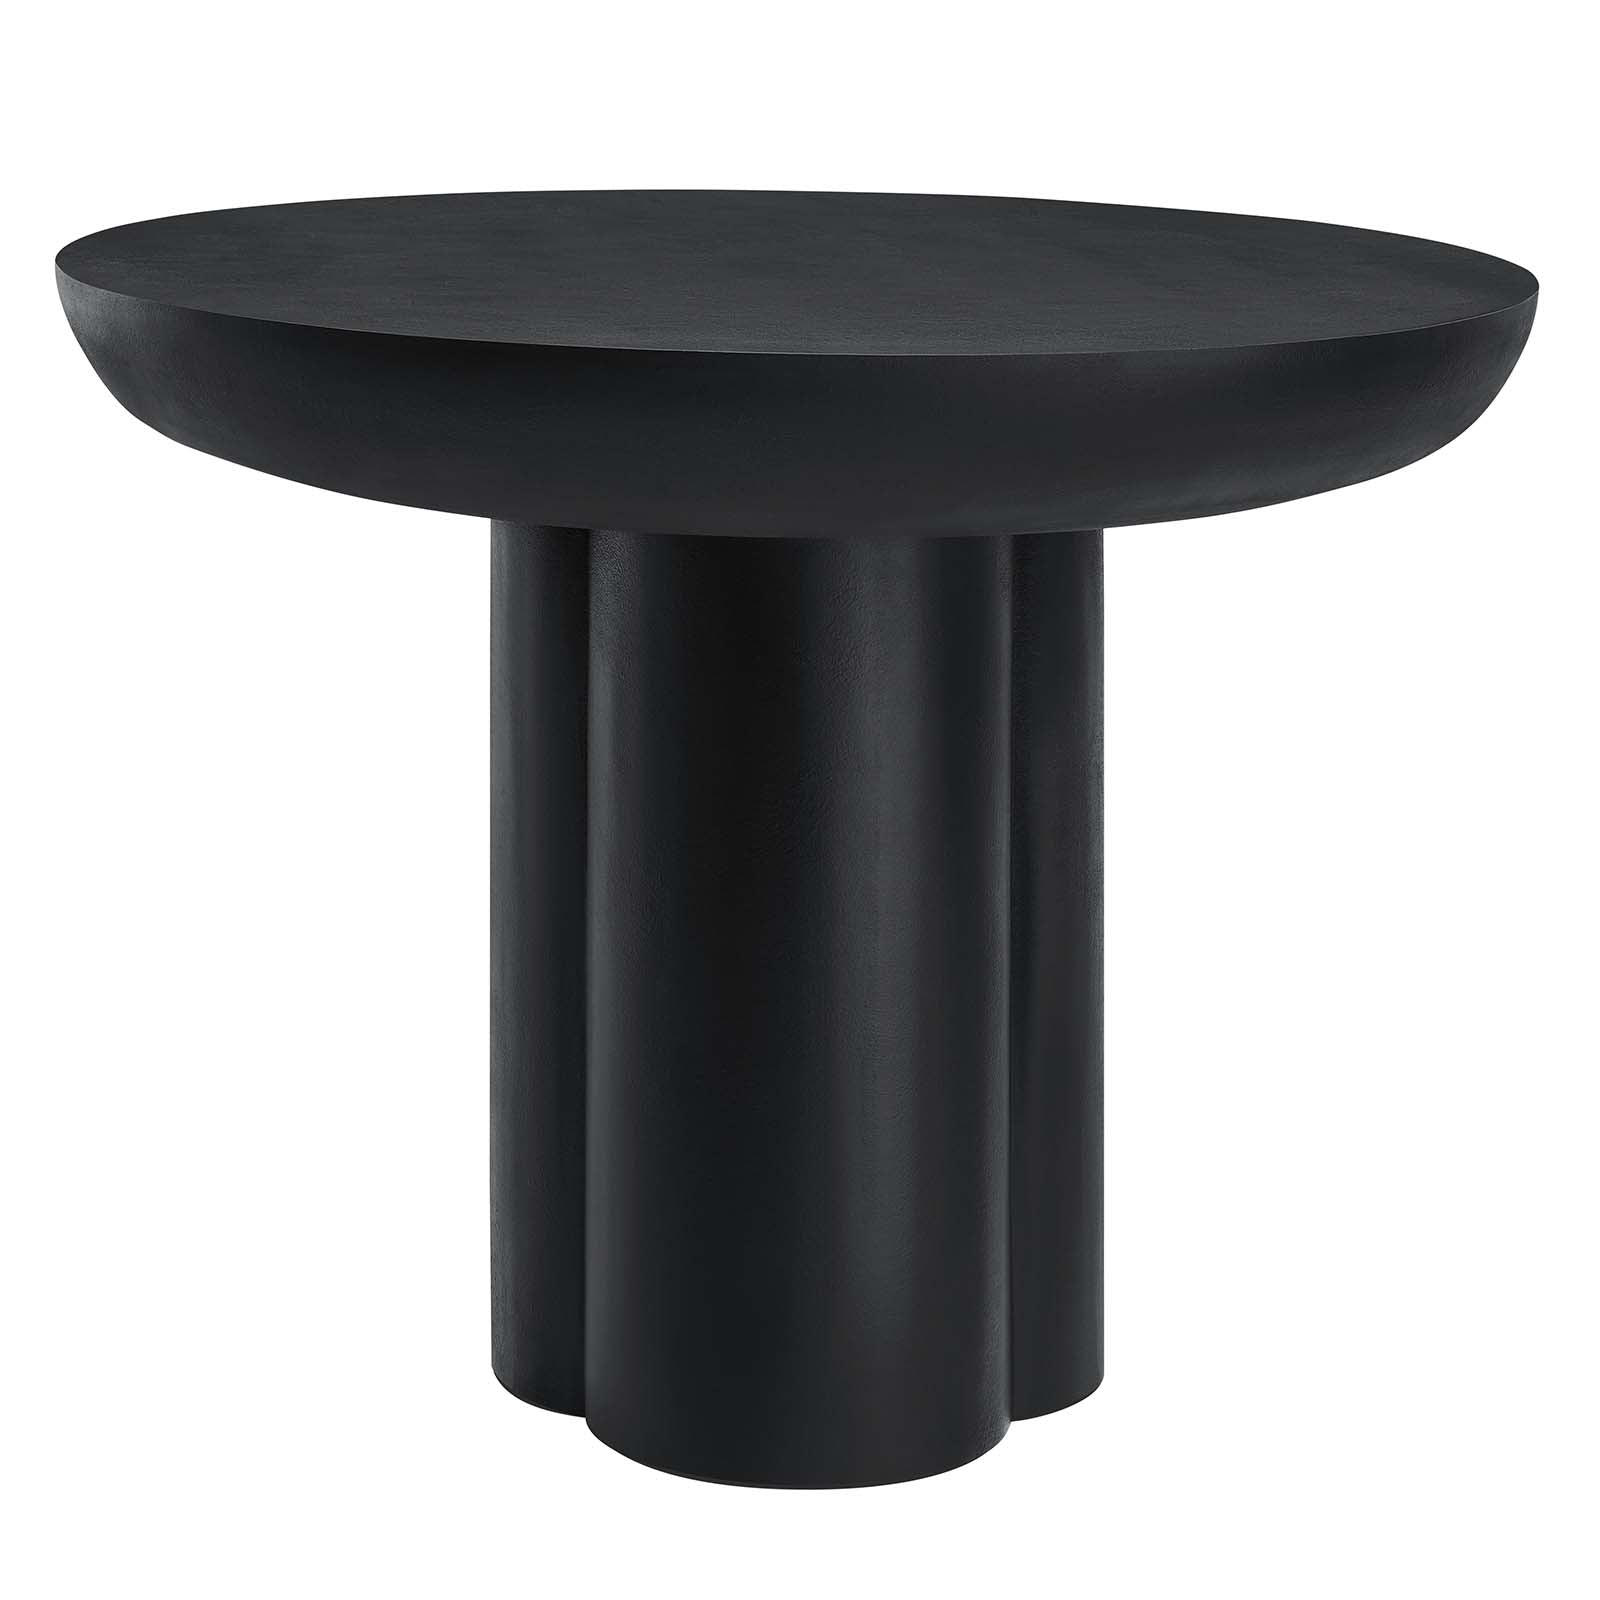 Caspian 40" Round Concrete Dining Table - East Shore Modern Home Furnishings